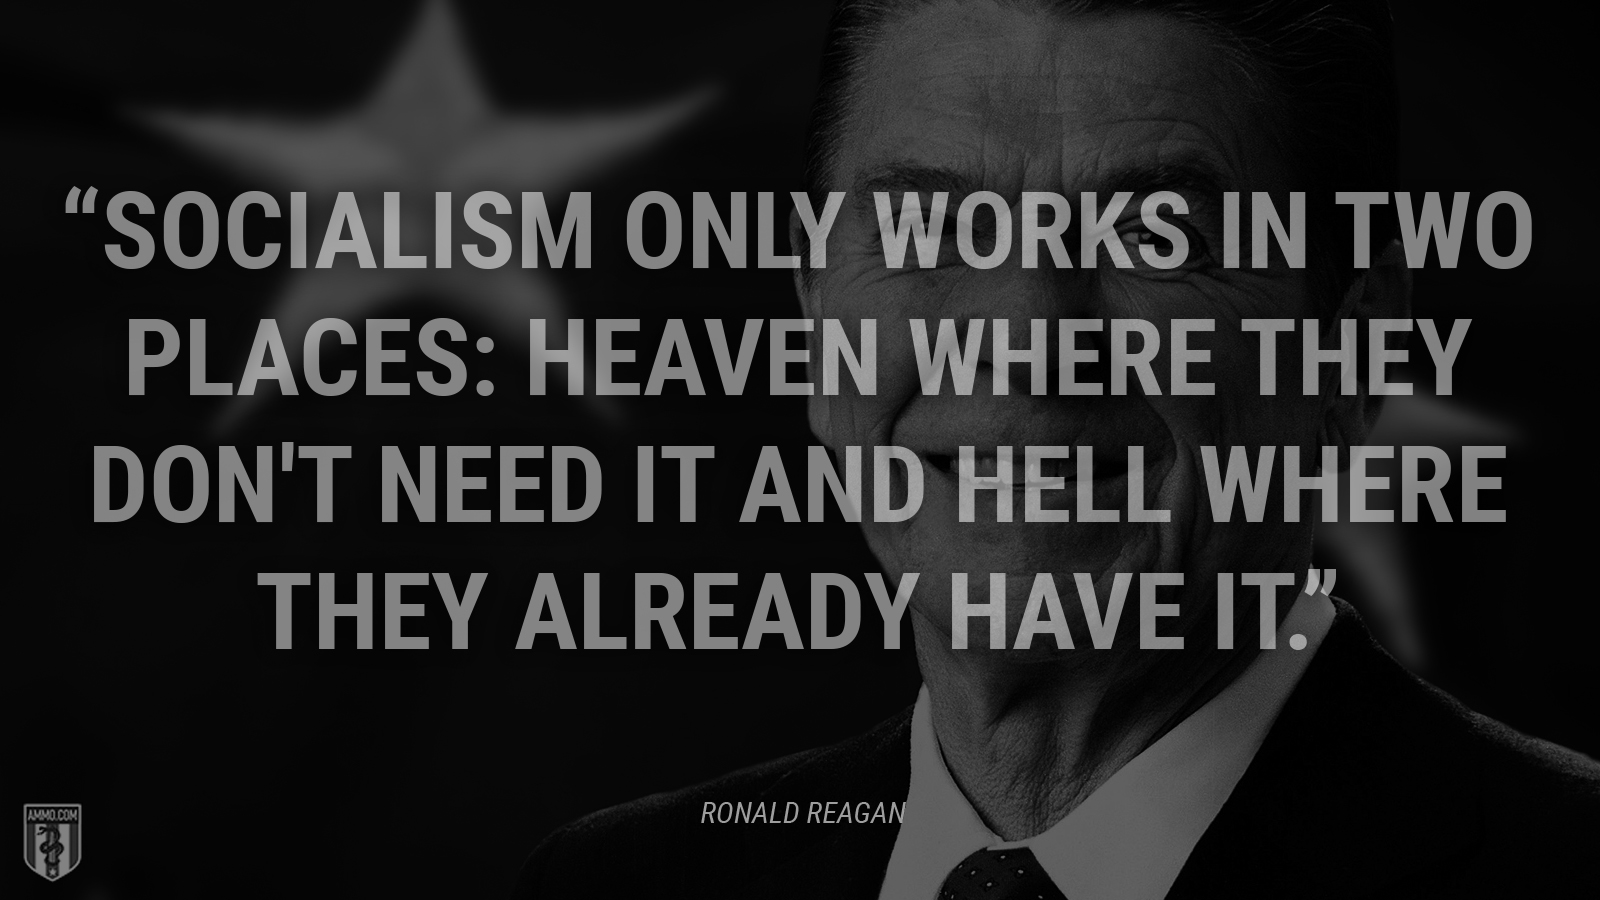 “Socialism only works in two places: Heaven where they don't need it and hell where they already have it.” - Ronald Reagan